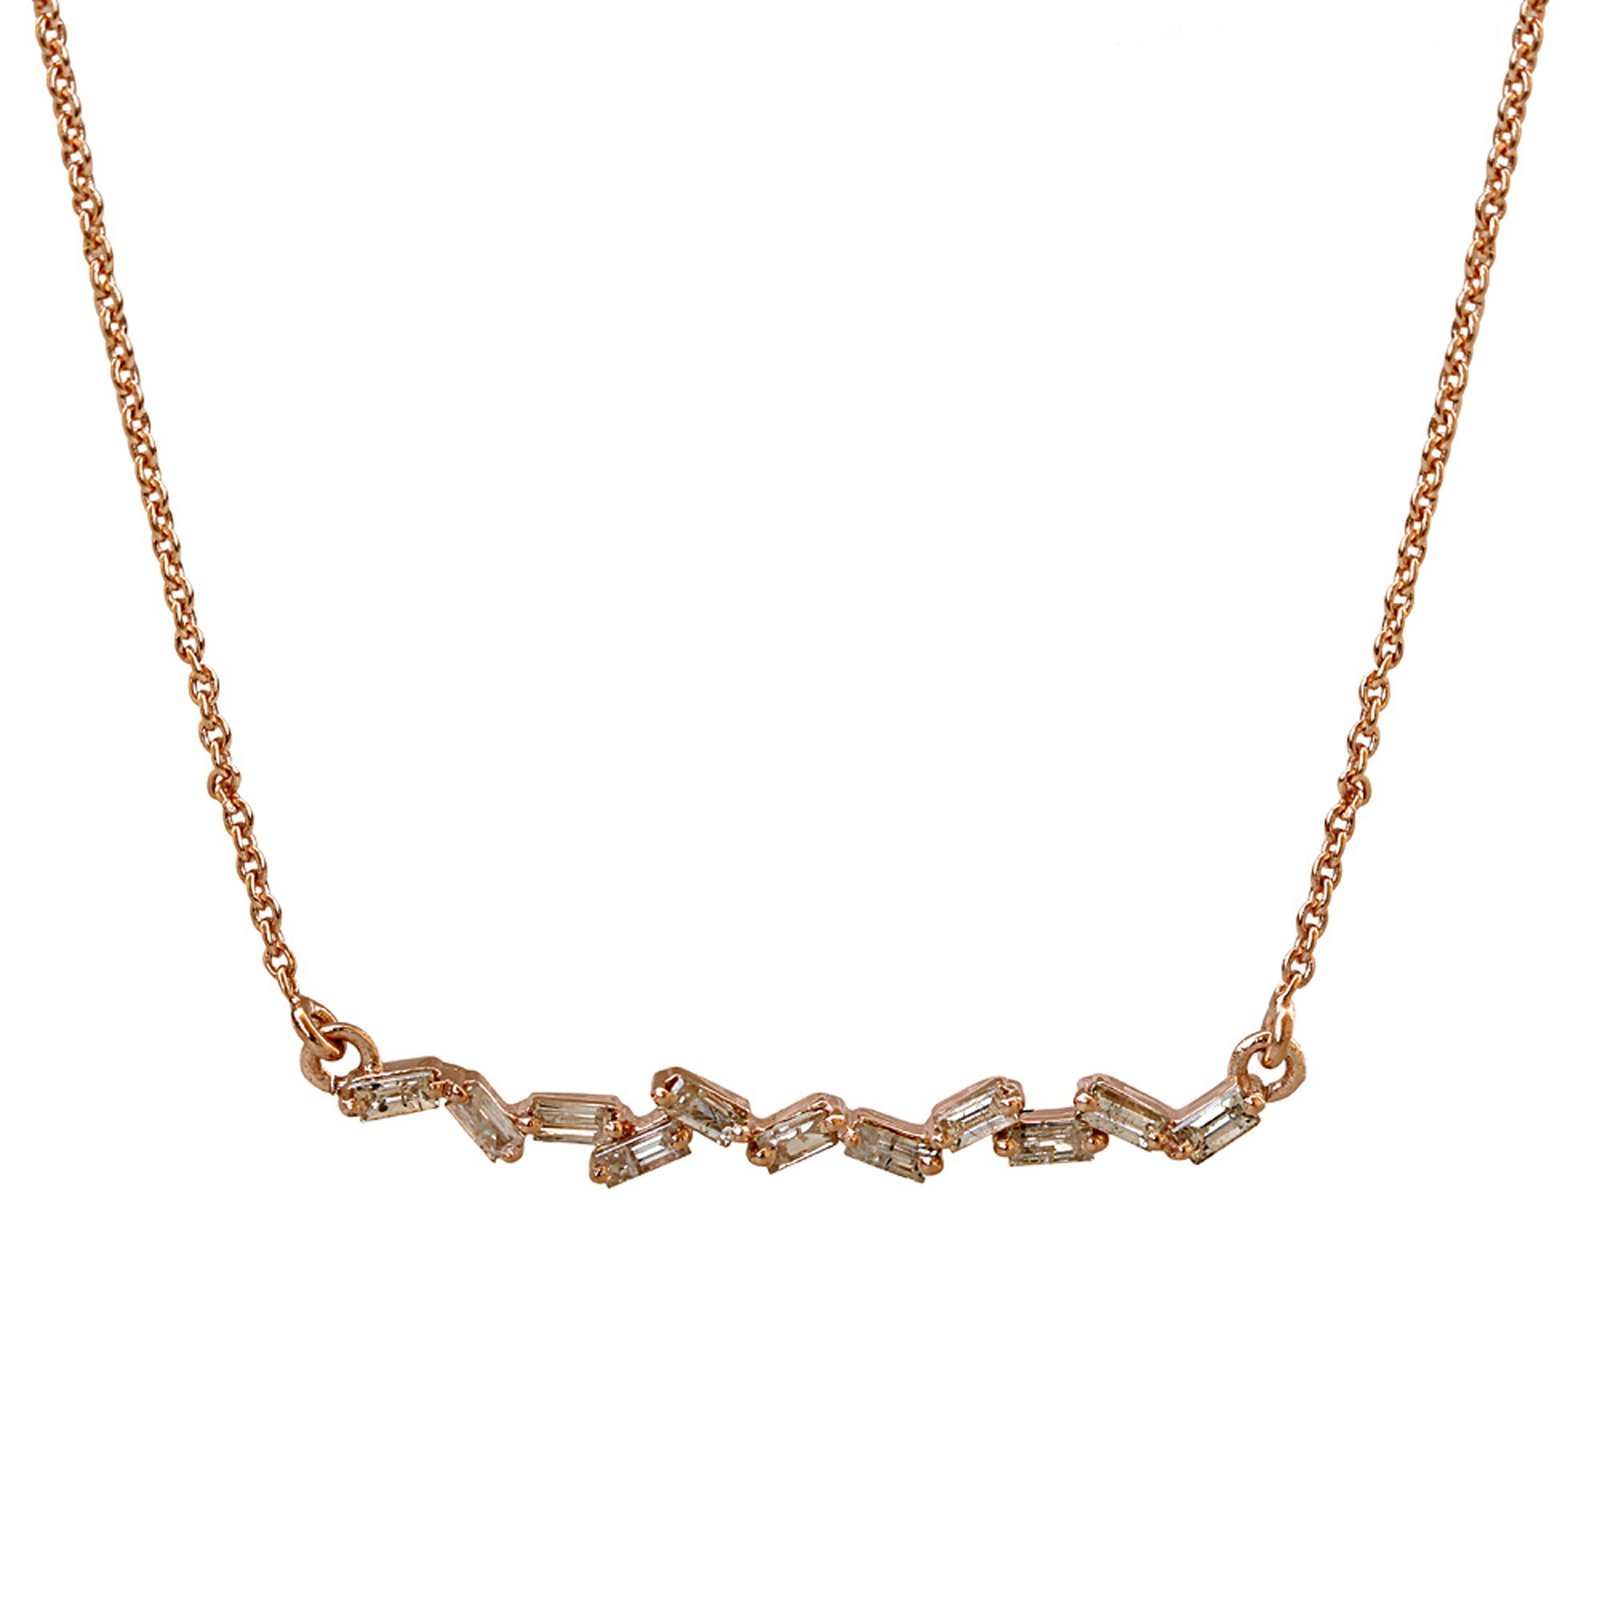 Baguette diamond chain necklace set in 18k solid gold